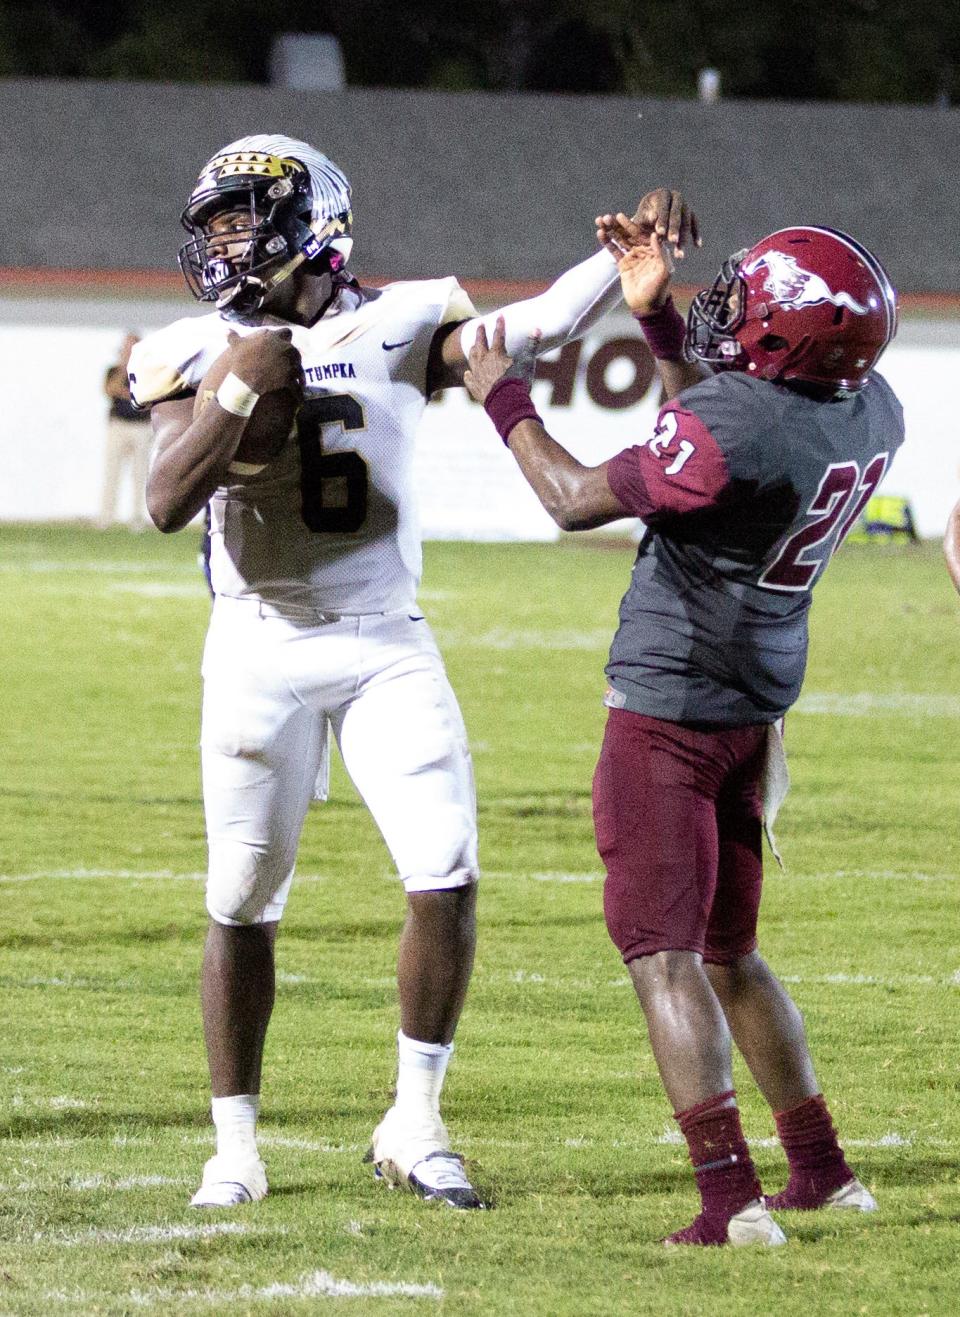 Tempers flared between Wetumpka's Tyquan Rawls and Stanhope's Quentarius Edwards during the third quarter.